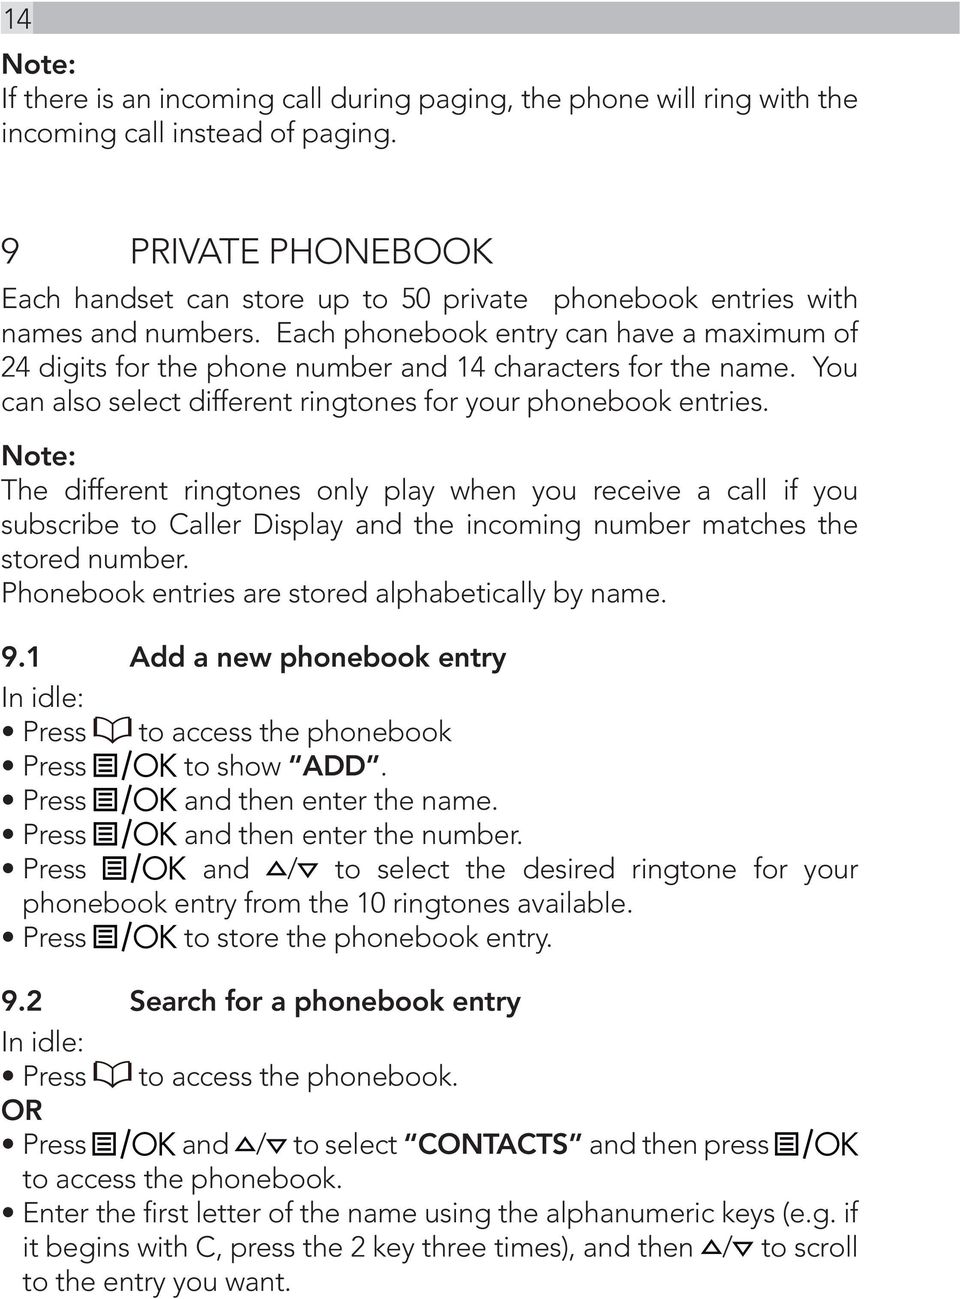 Each phonebook entry can have a maximum of 24 digits for the phone number and 14 characters for the name. You can also select different ringtones for your phonebook entries.